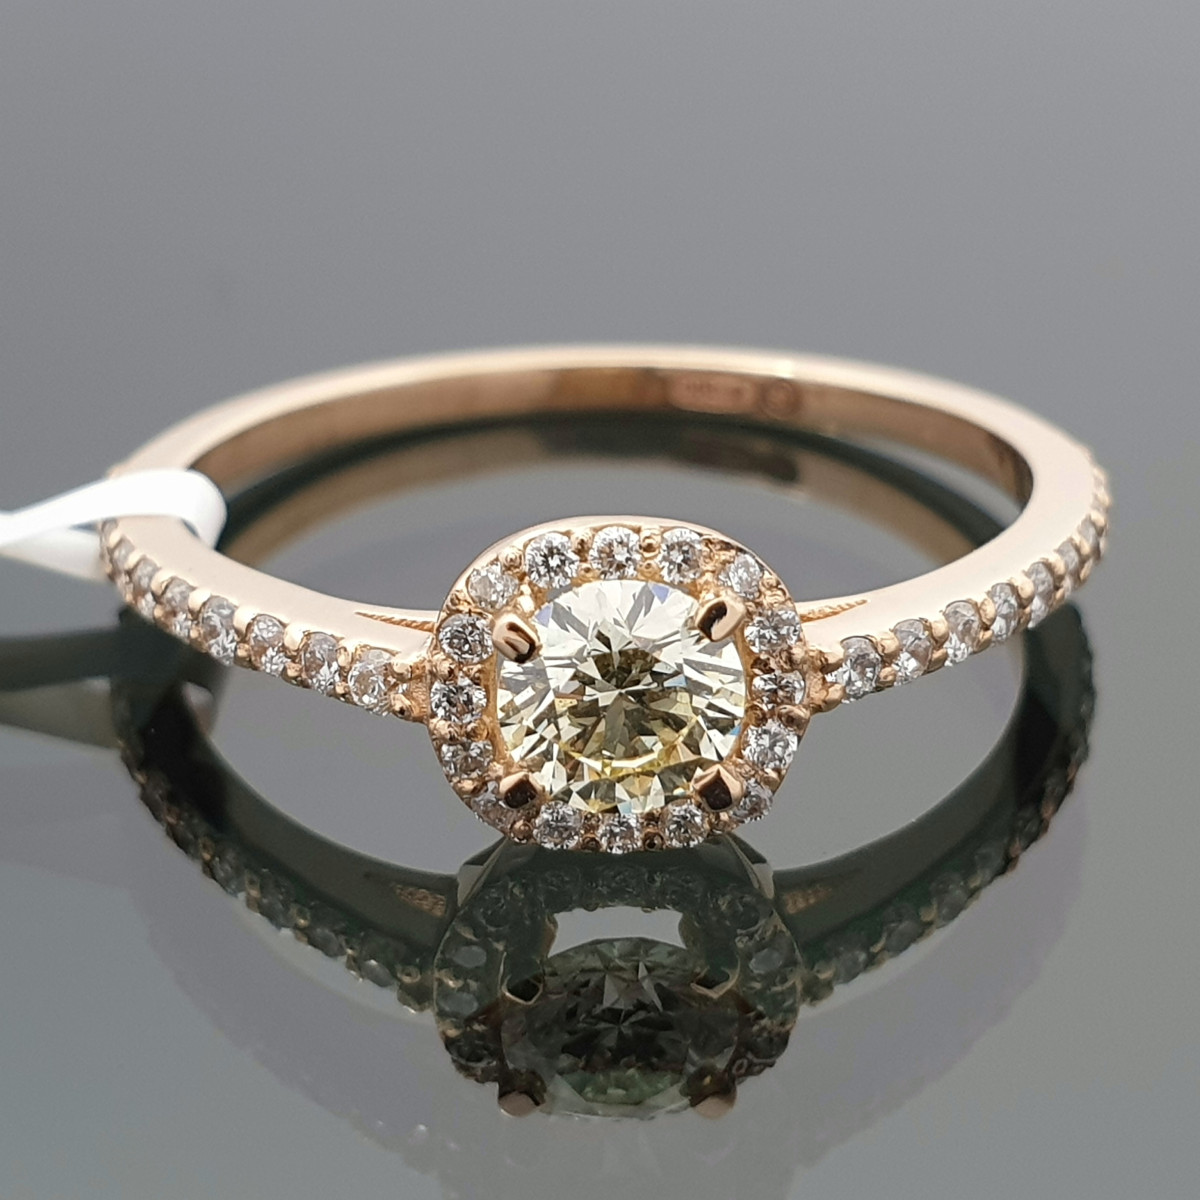  Rose Gold Halo Engagement Ring with Fancy Diamond (1712) 1